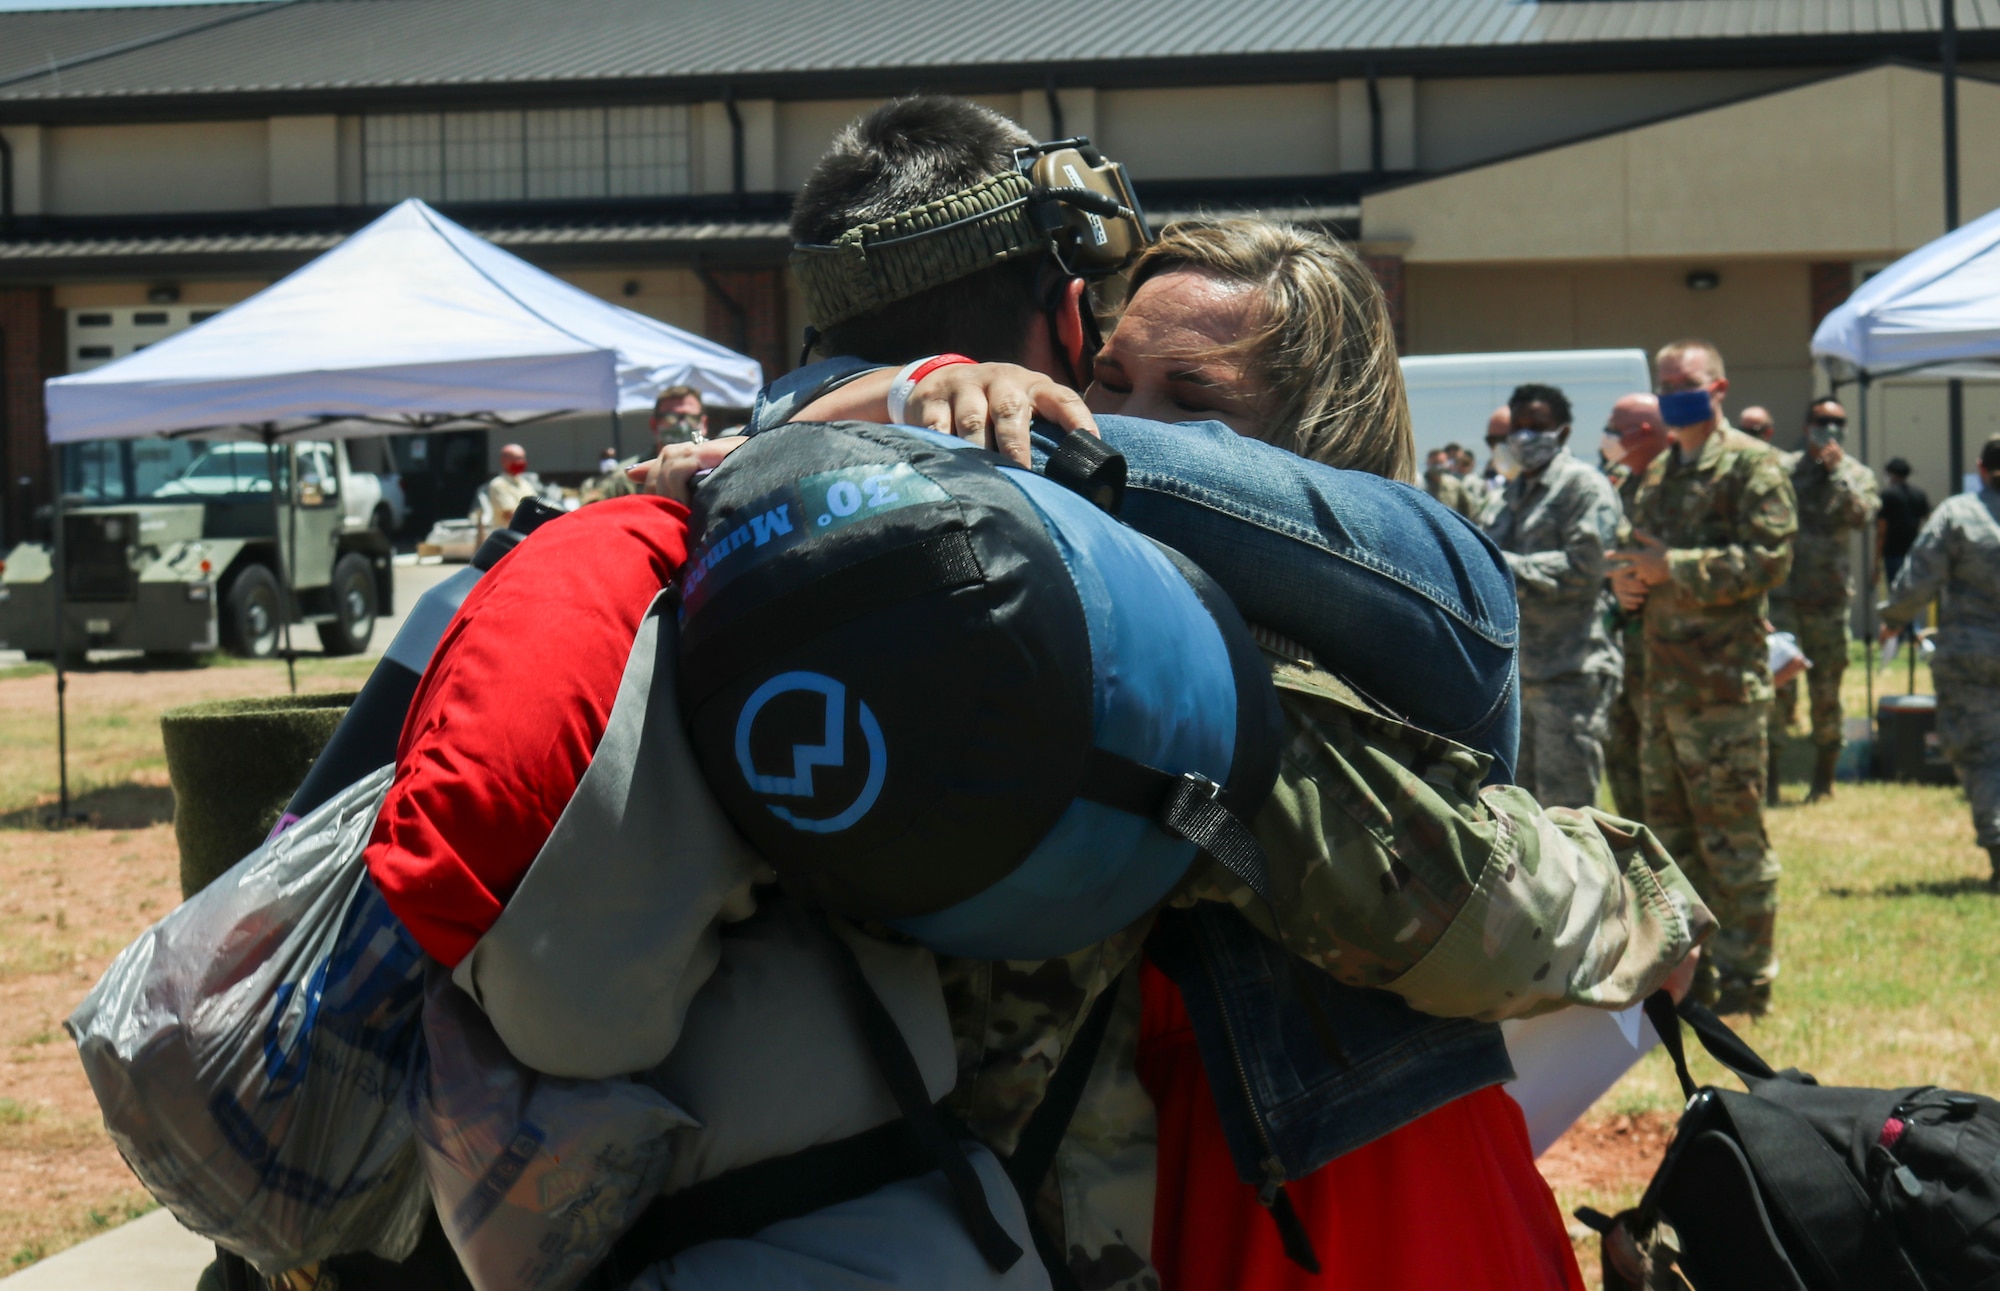 Master Sgt. Jason McGinnis, 317th Aircraft Maintenance Squadron production superintendent, hugs his wife, Lisa McGinnis, after returning from a deployment to Djibouti, Africa, at Dyess Air Force Base, Texas, May 18, 2020. Family members have access to a multitude of resources across the base to help them while their military spouses are deployed. (U.S. Air Force photo by Staff Sgt. David Owsianka)